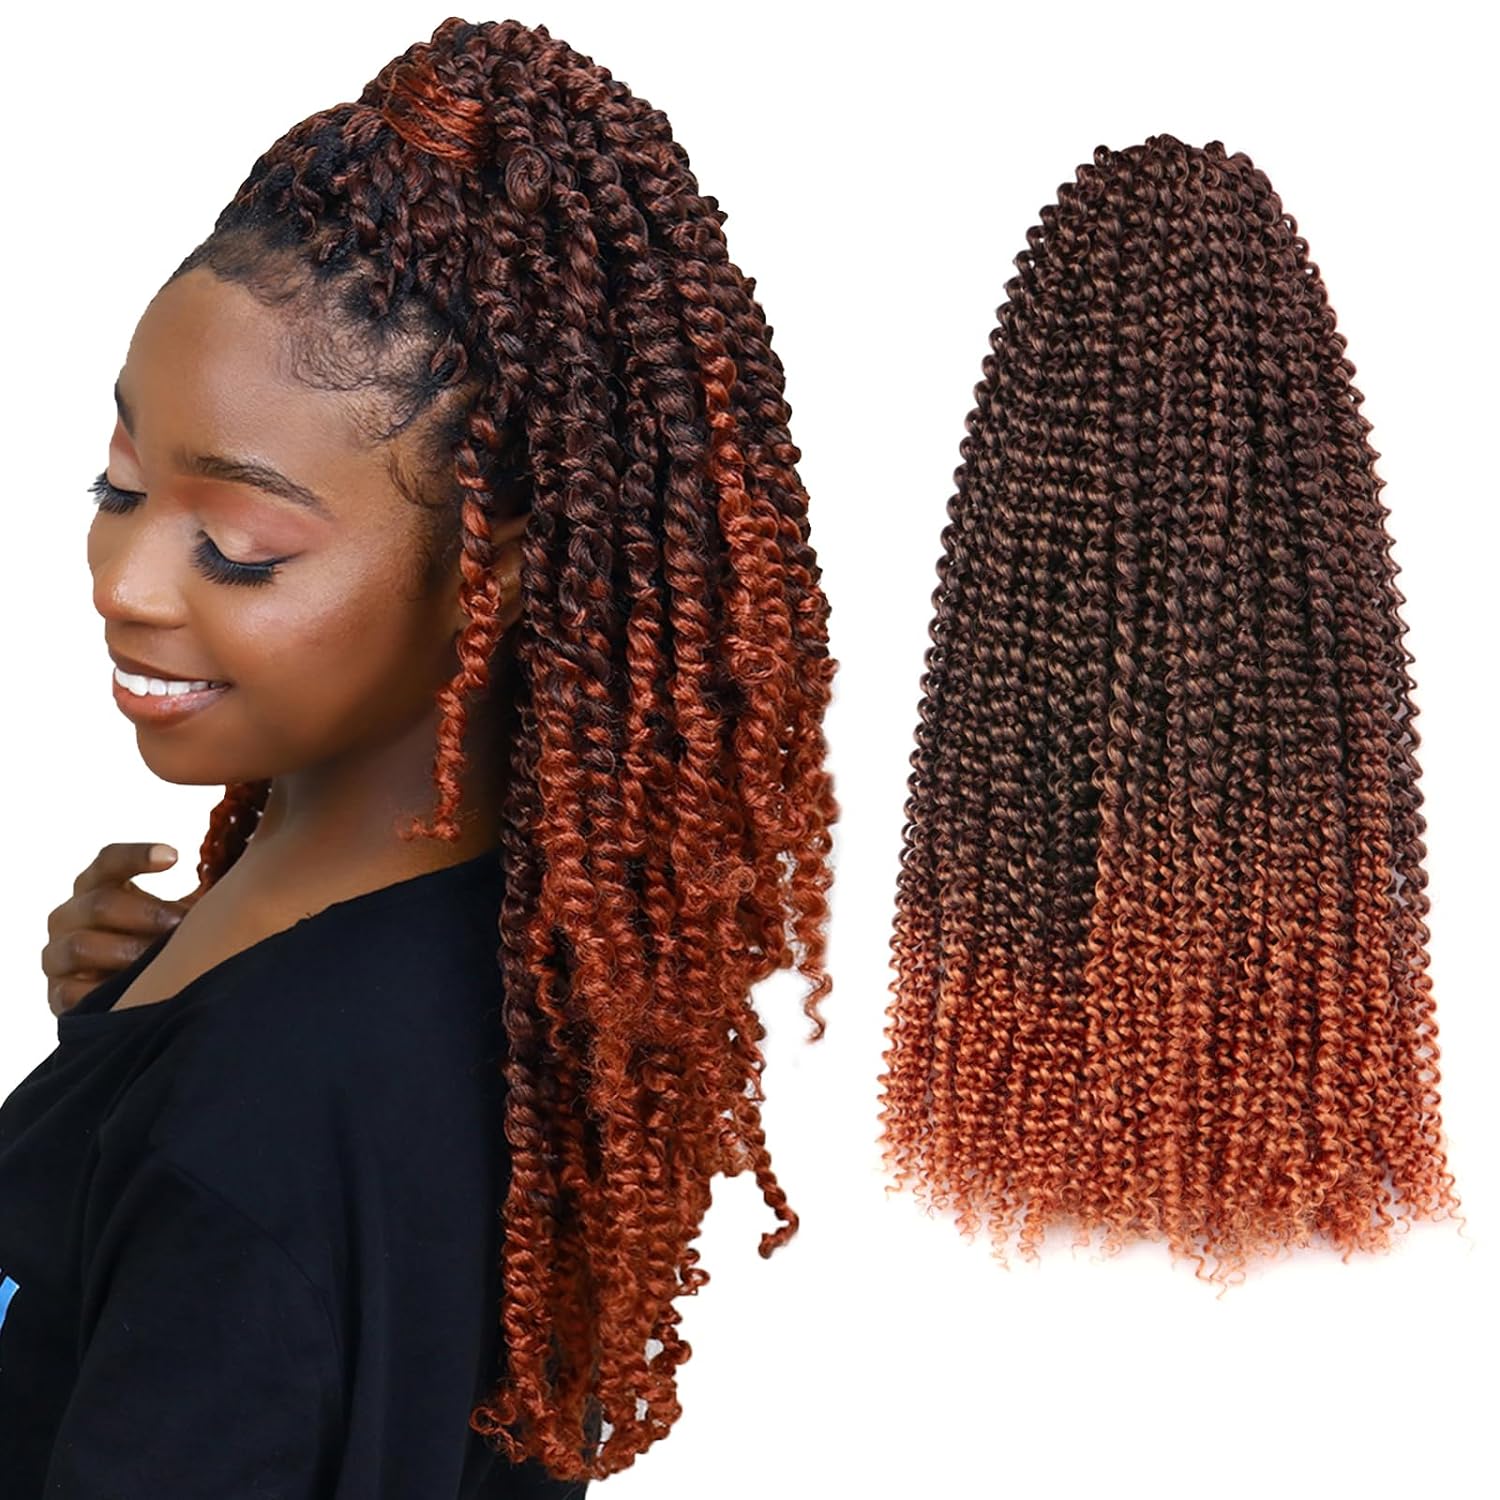 Clearance | Bohemian for Passion Twist 6 Packs | Crochet Synthetic Braiding Hair Extension for Passion Twists